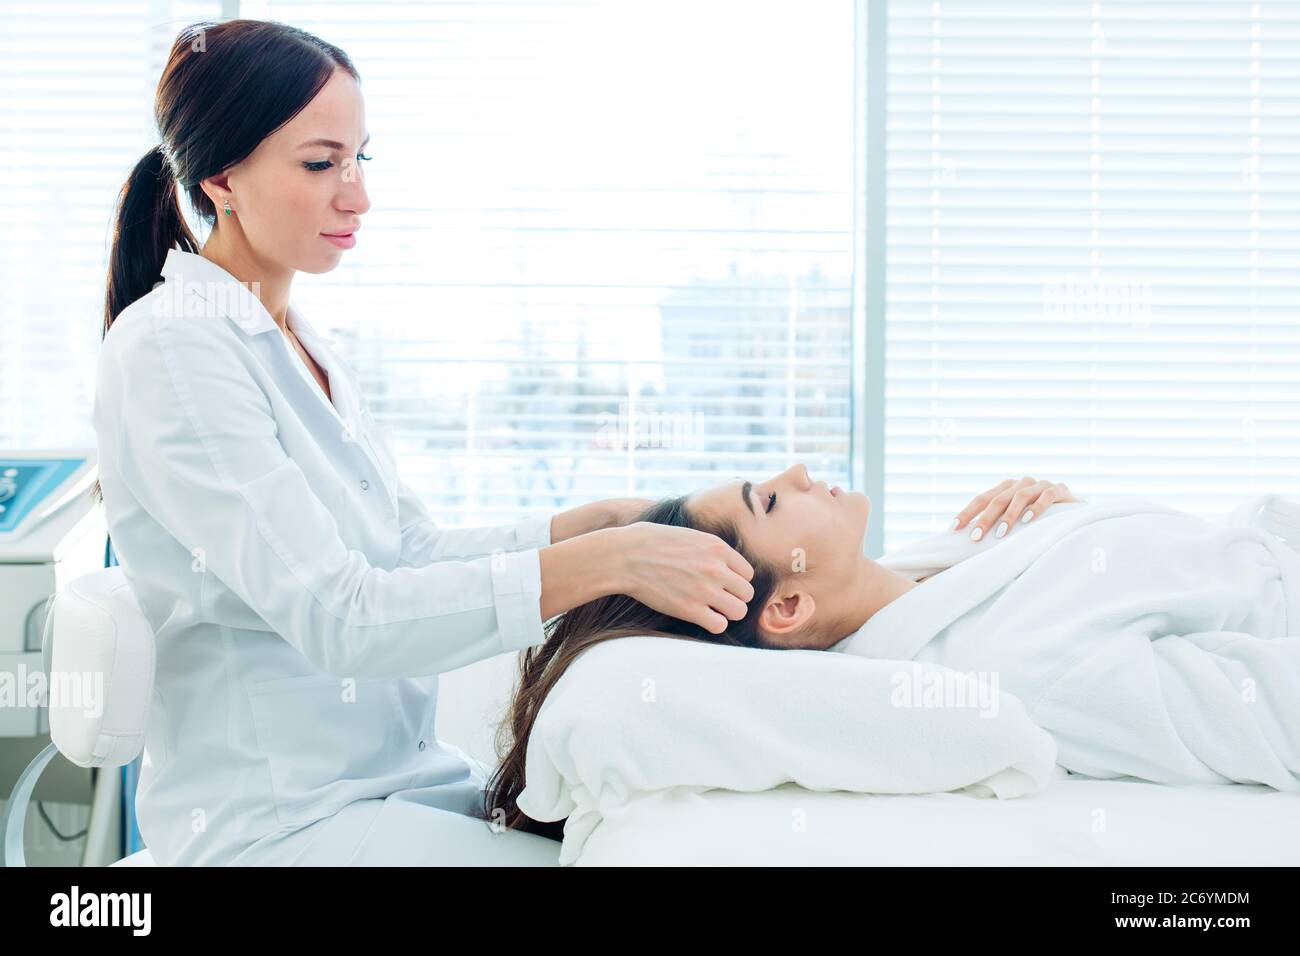 Cosmetology Image Of Beautician Doing Head Massage Or Prepare Female